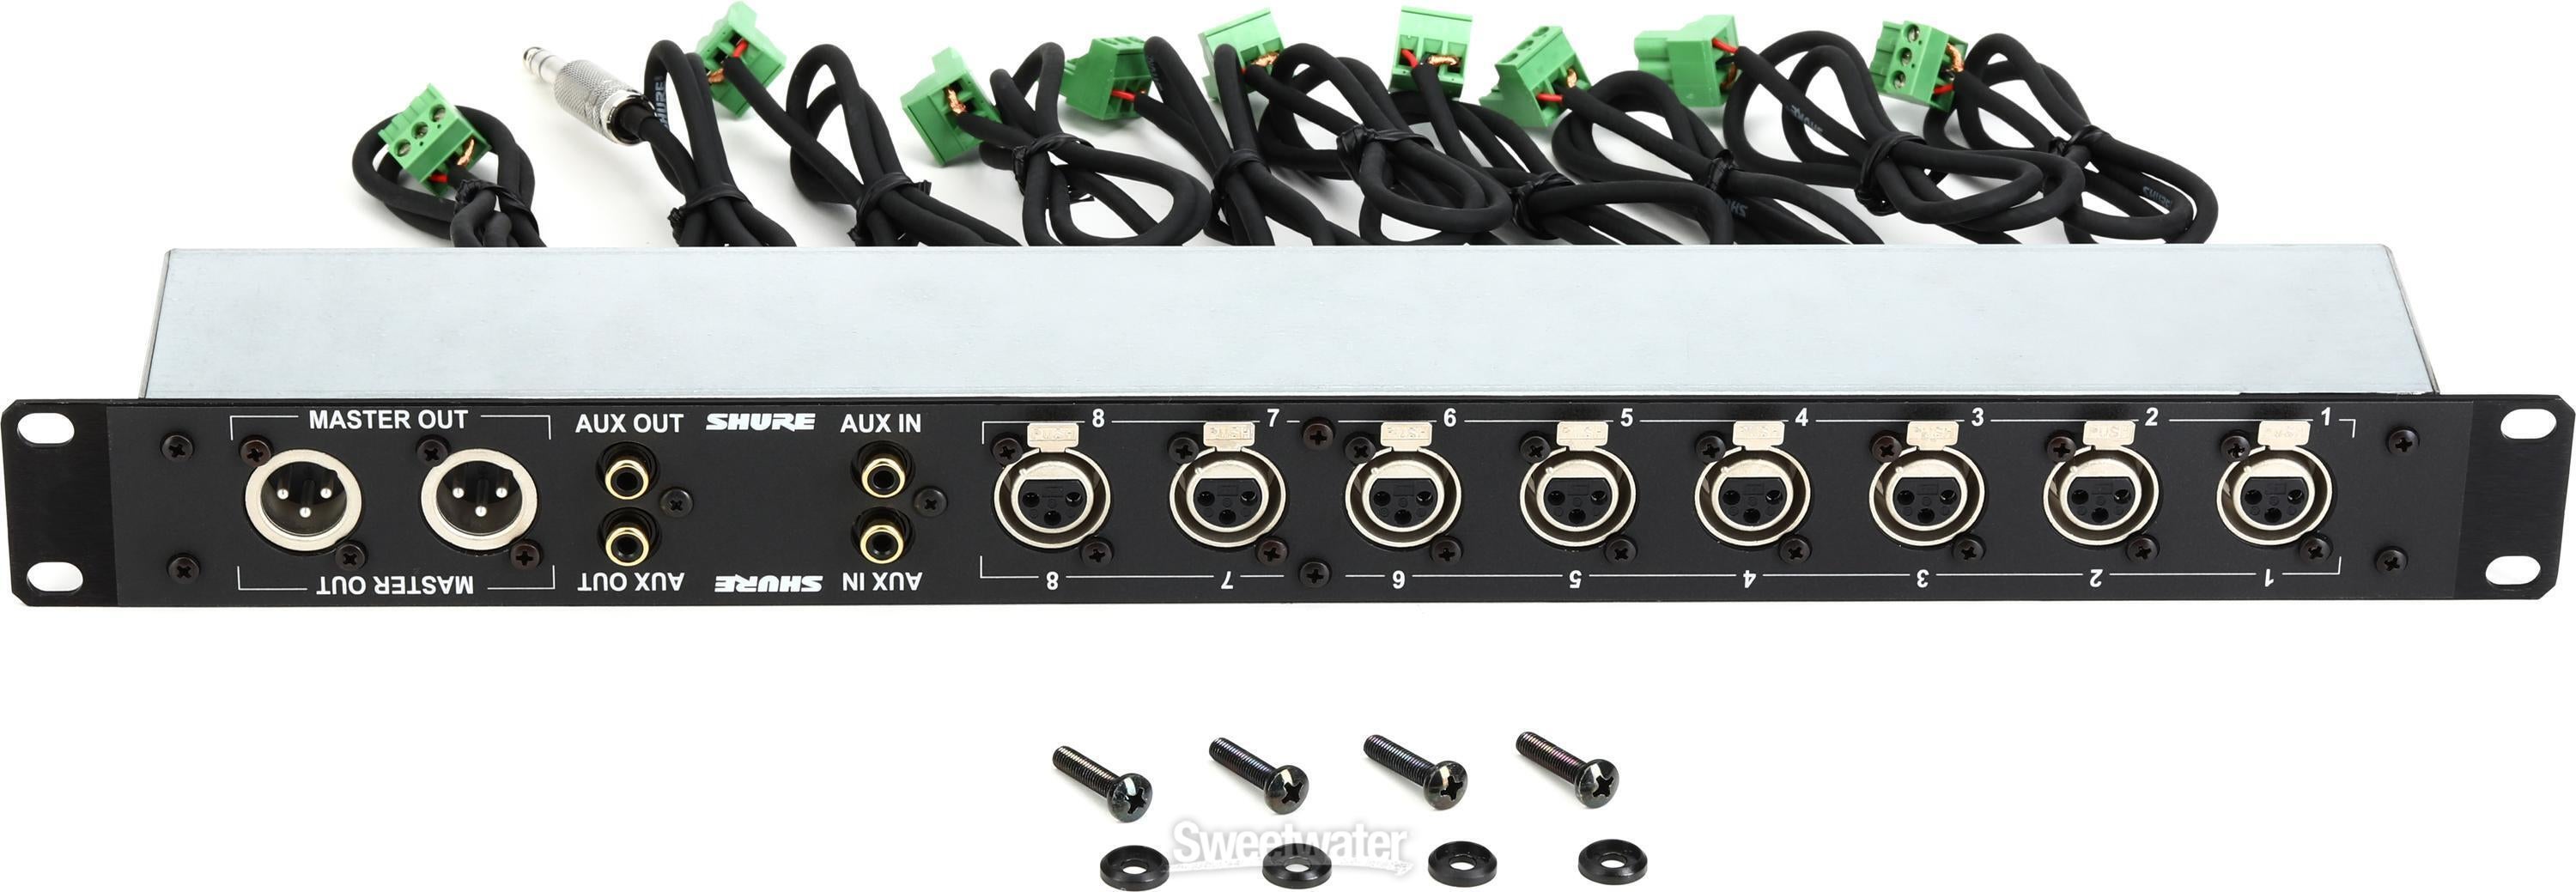 Shure RKC800 XLR Connector Kit for SCM810 and SCM800